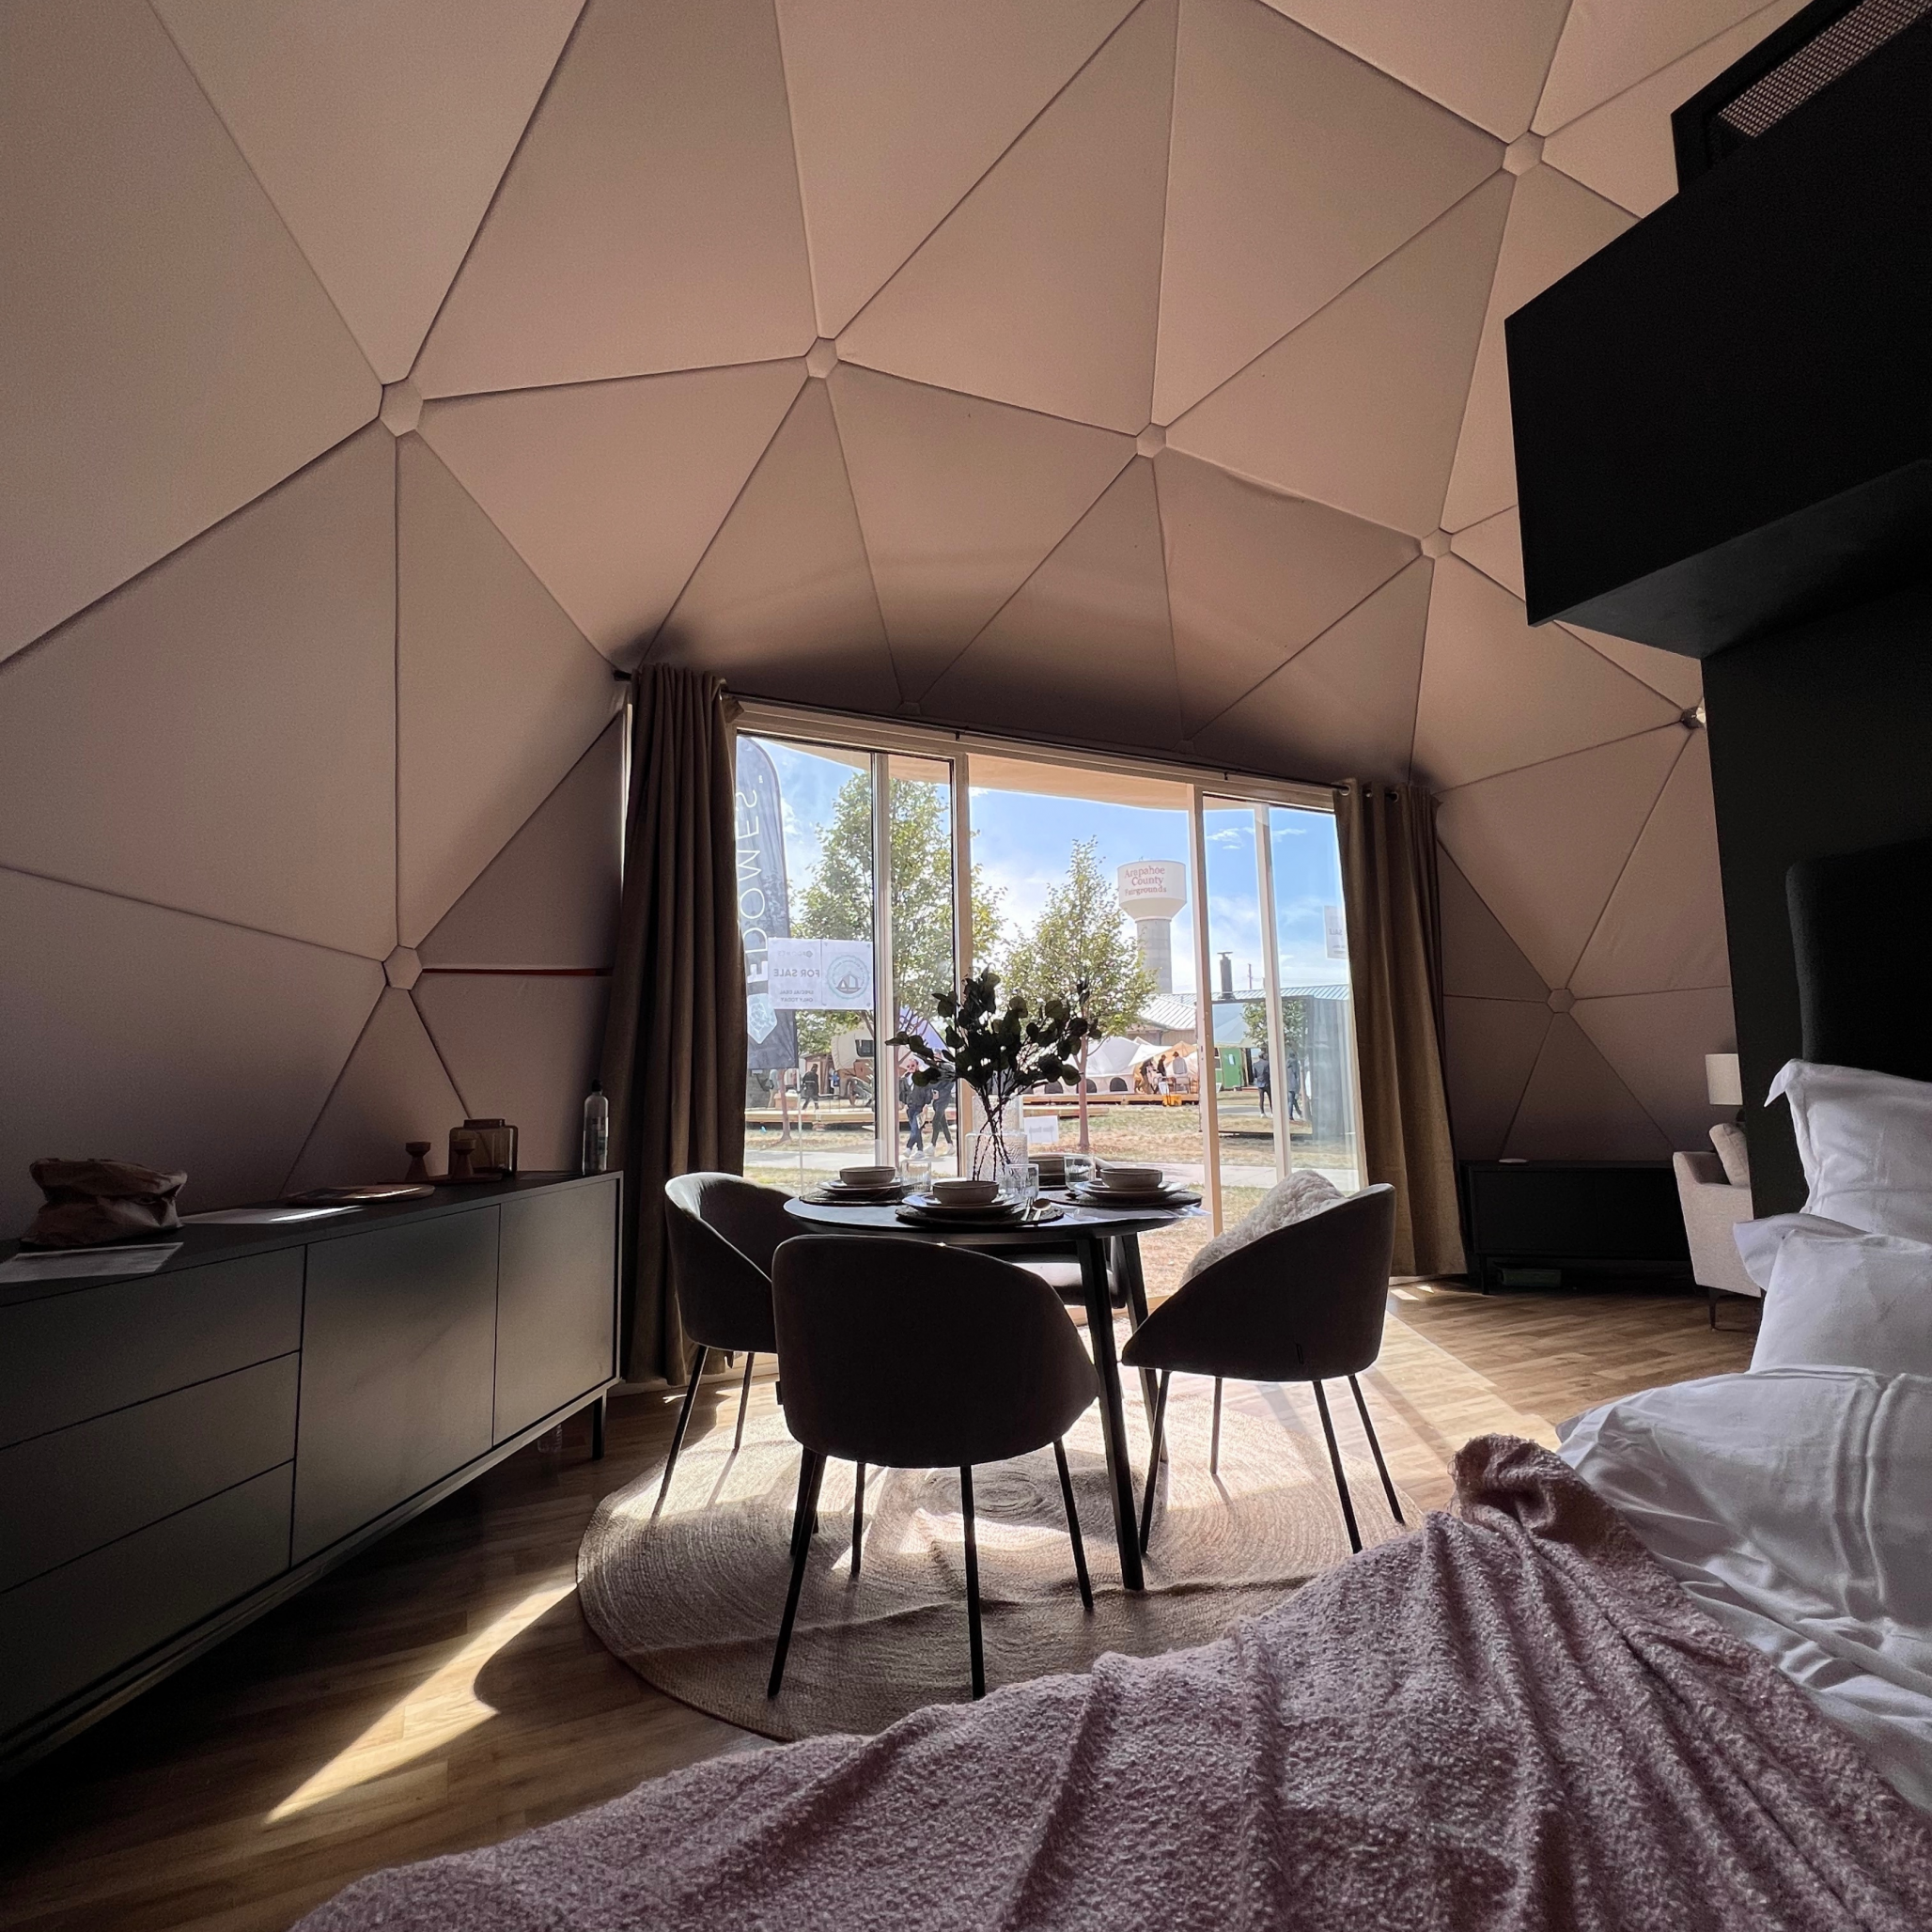 Inside of geodesic glamping dome by FDomes at Glamping Show Americas 2023, Colorado, USA